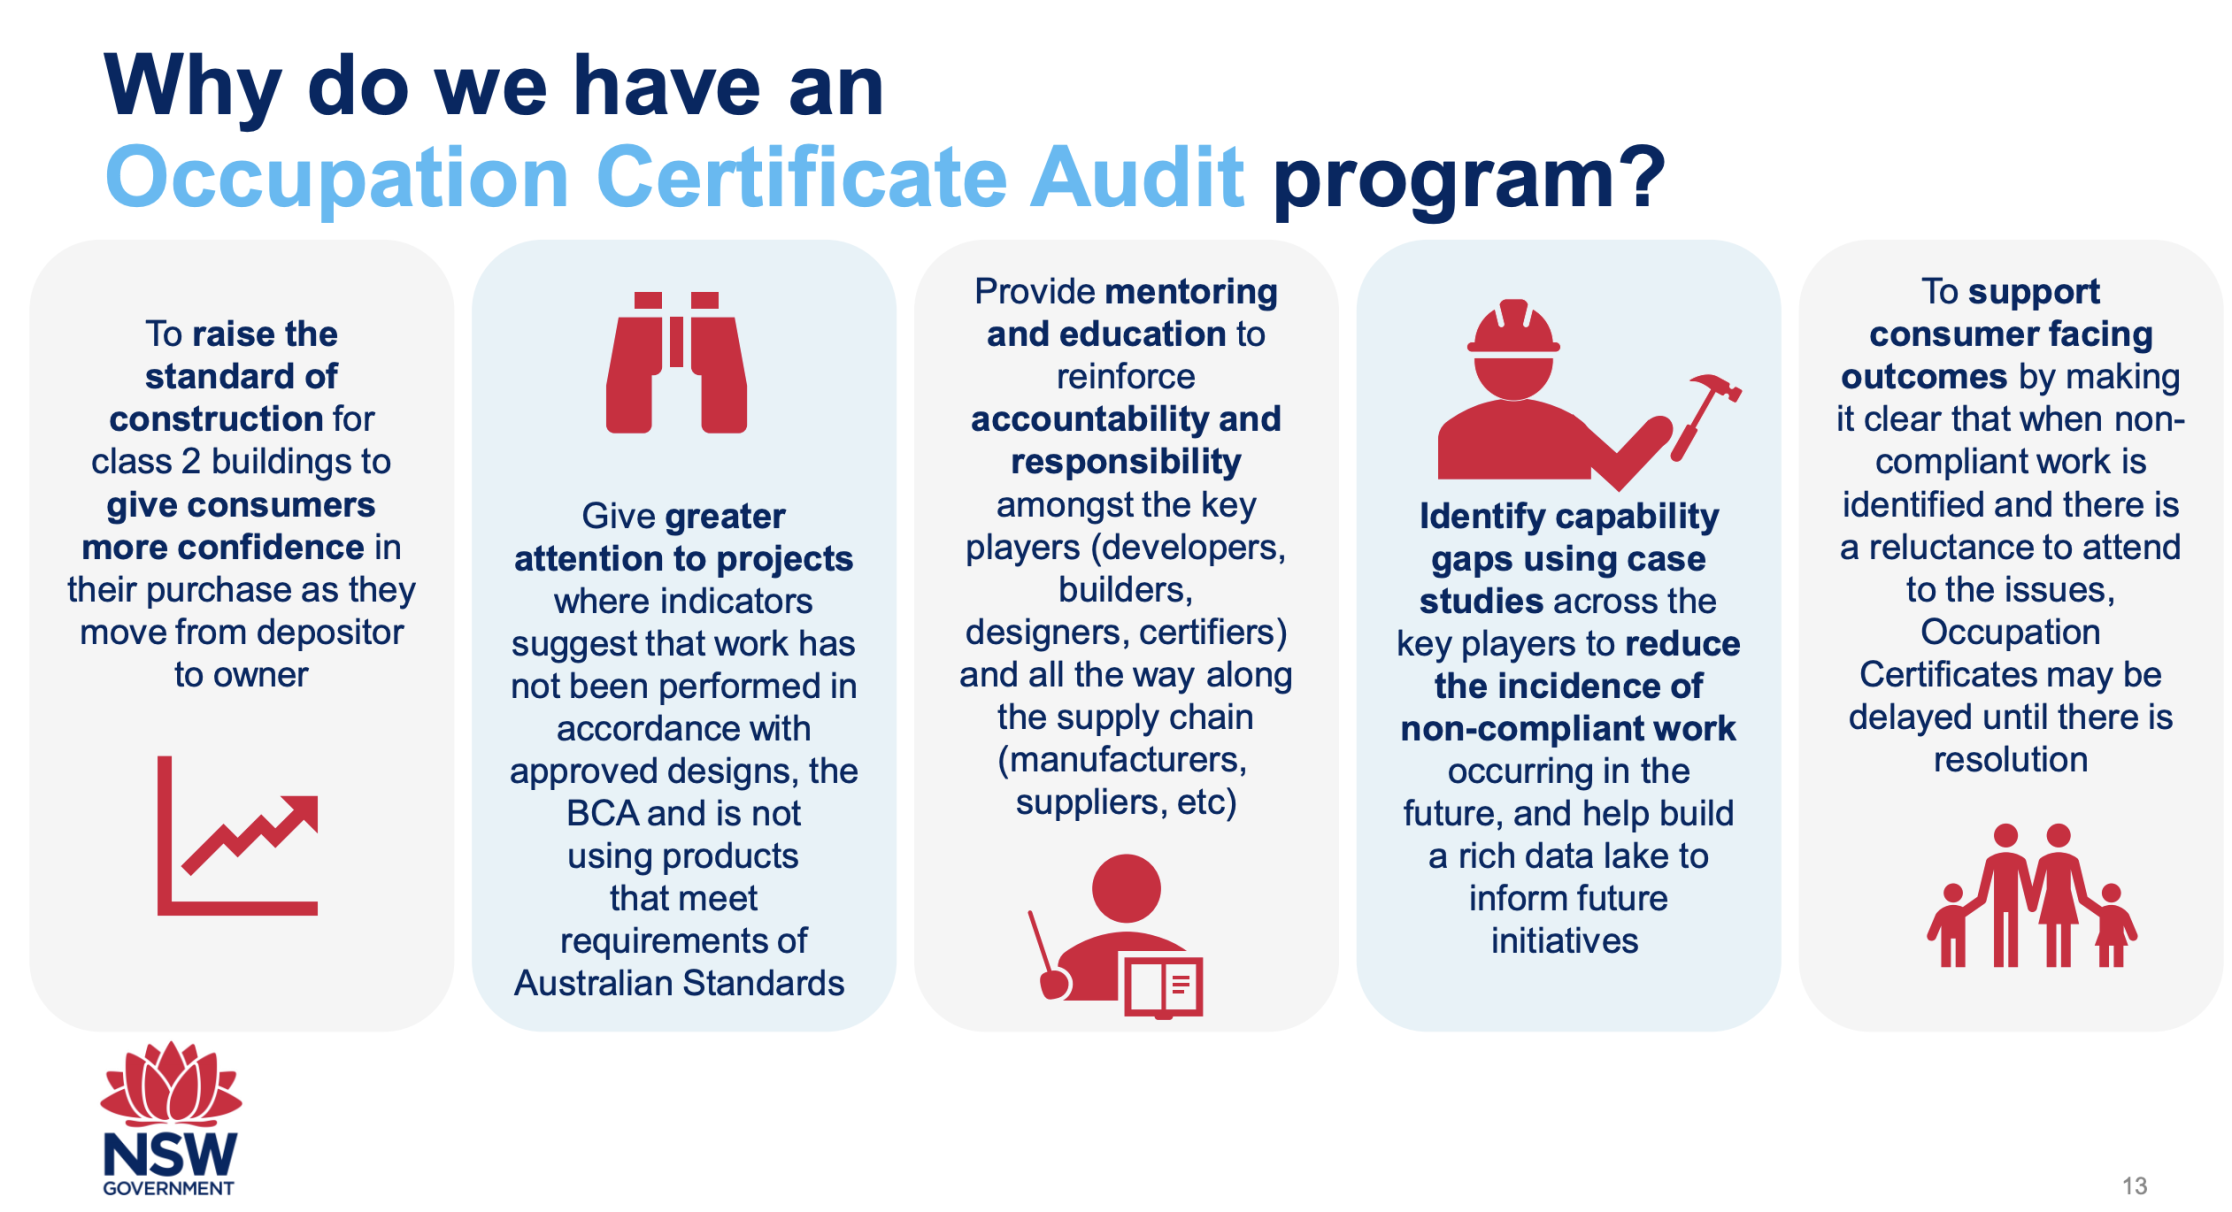 01_Why do we have an audit program